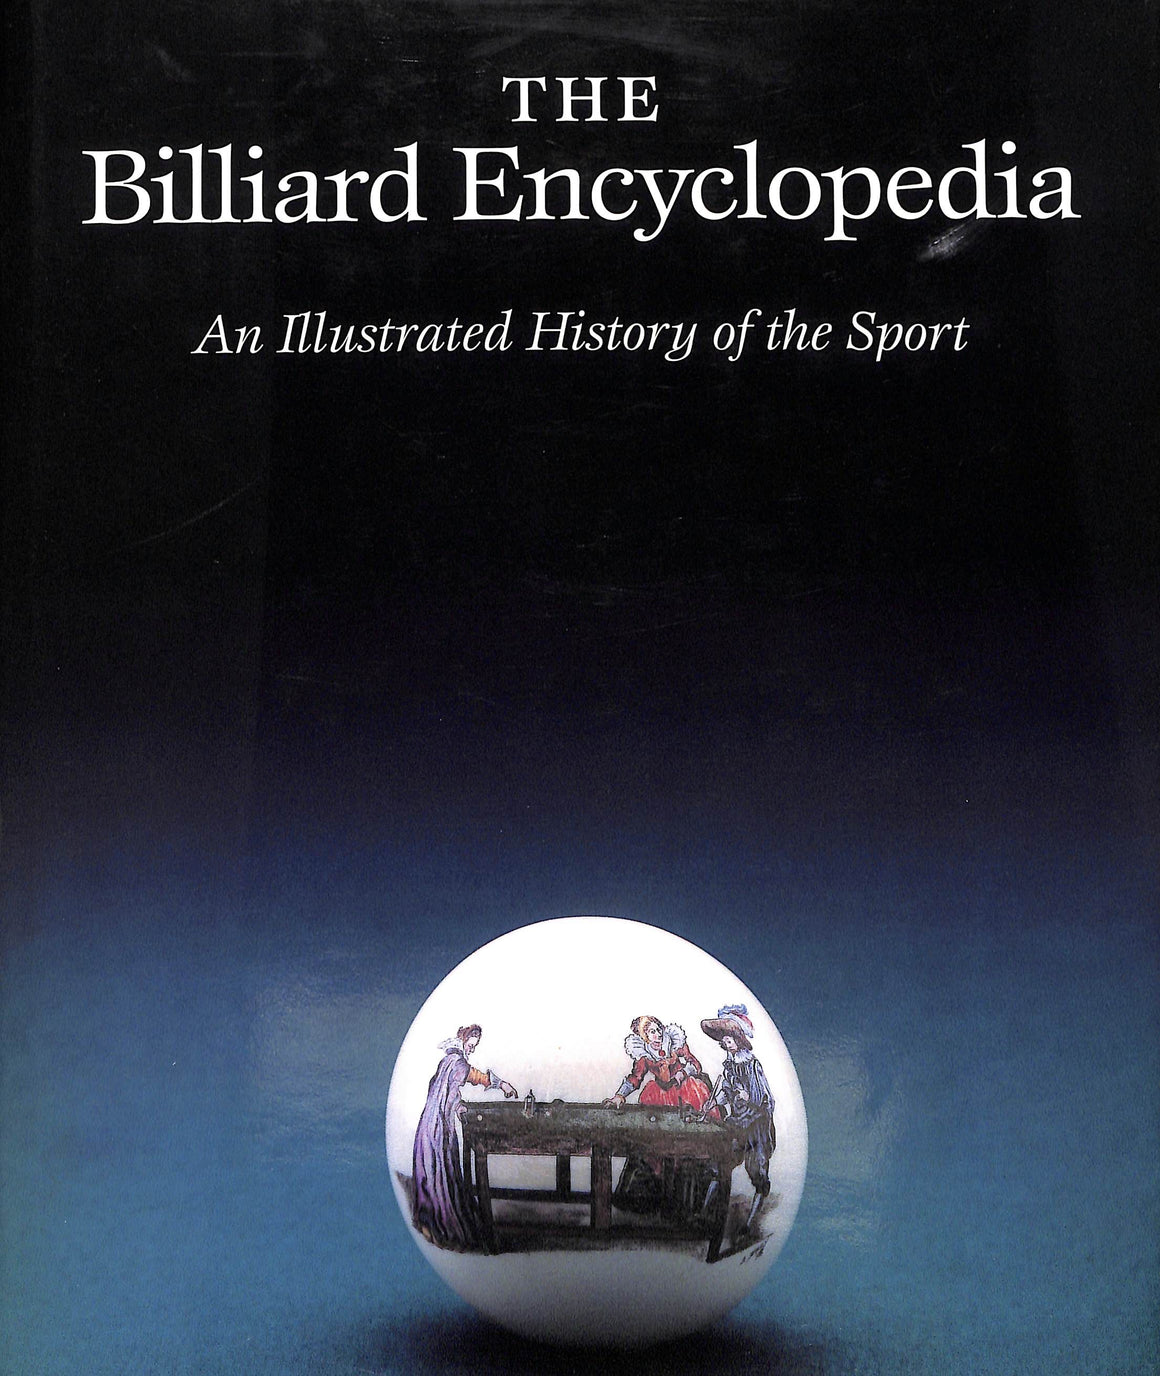 "The Billiard Encyclopedia: An Illustrated History of the Sport" 1994 STEIN, Victor and RUBINO, Paul